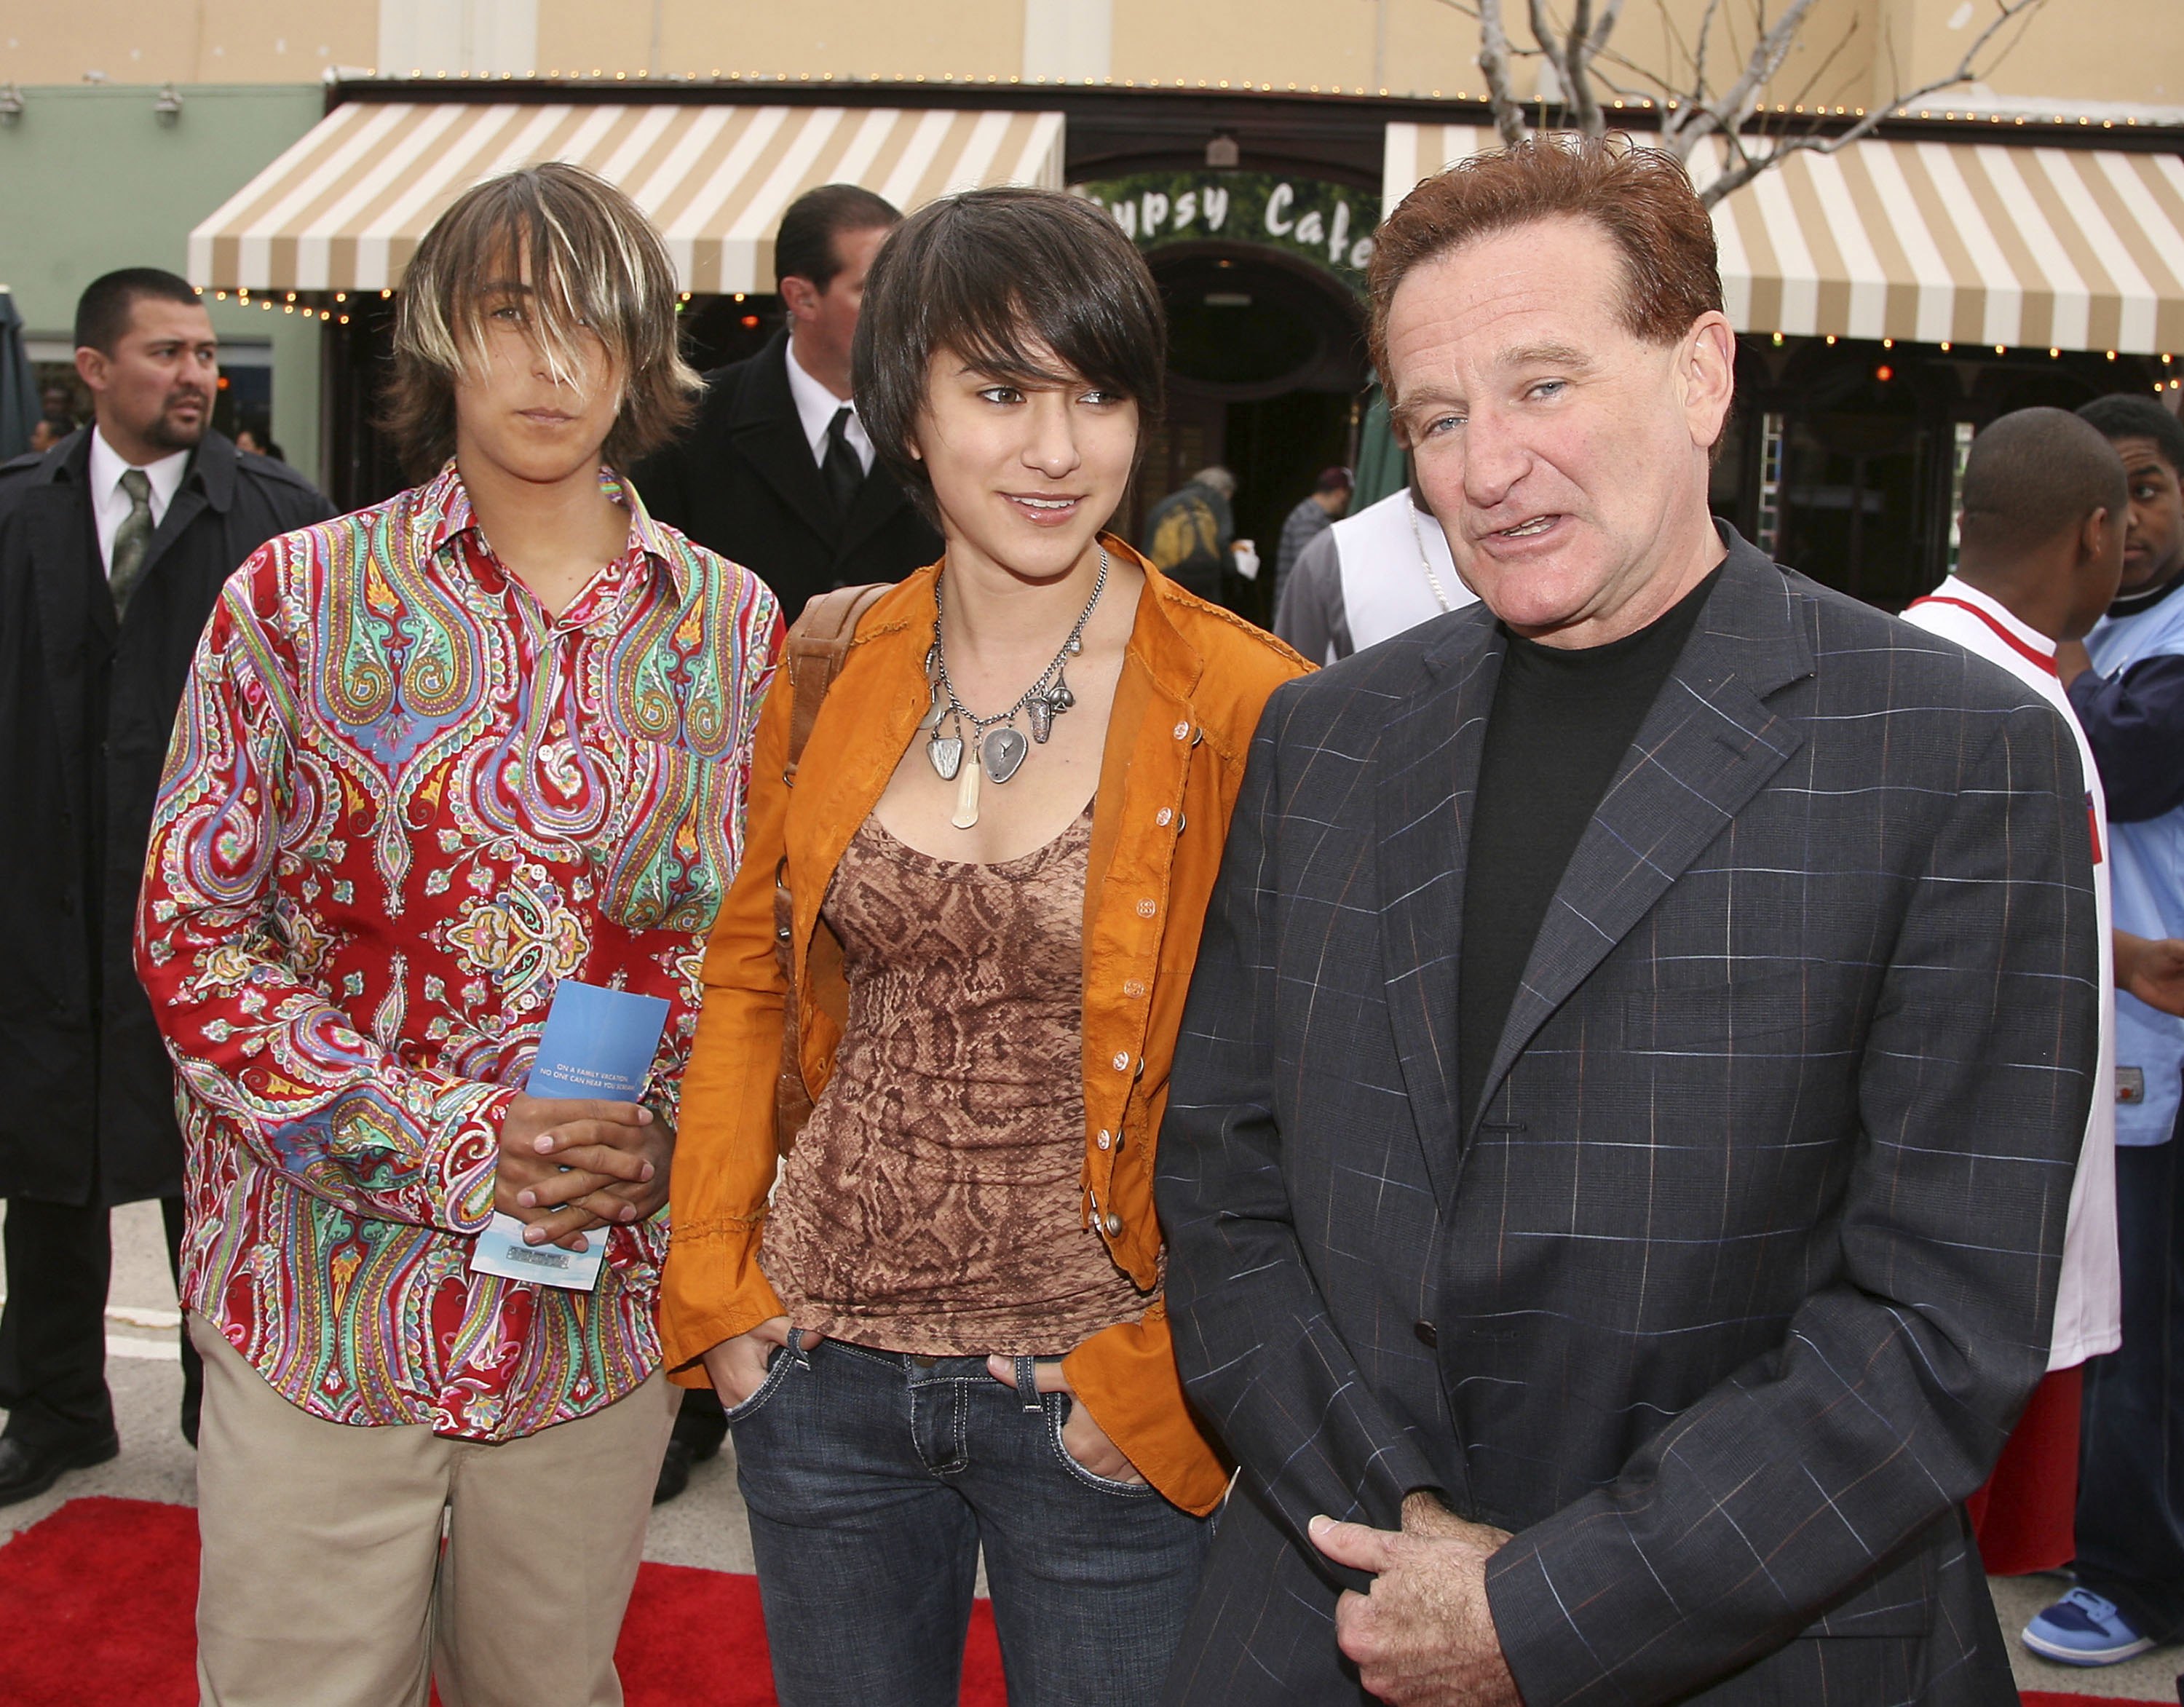 Cody, Zelda, and Robin Williams pose at the premiere of "RV" on April 23, 2006, in Los Angeles, California | Source: Getty Images